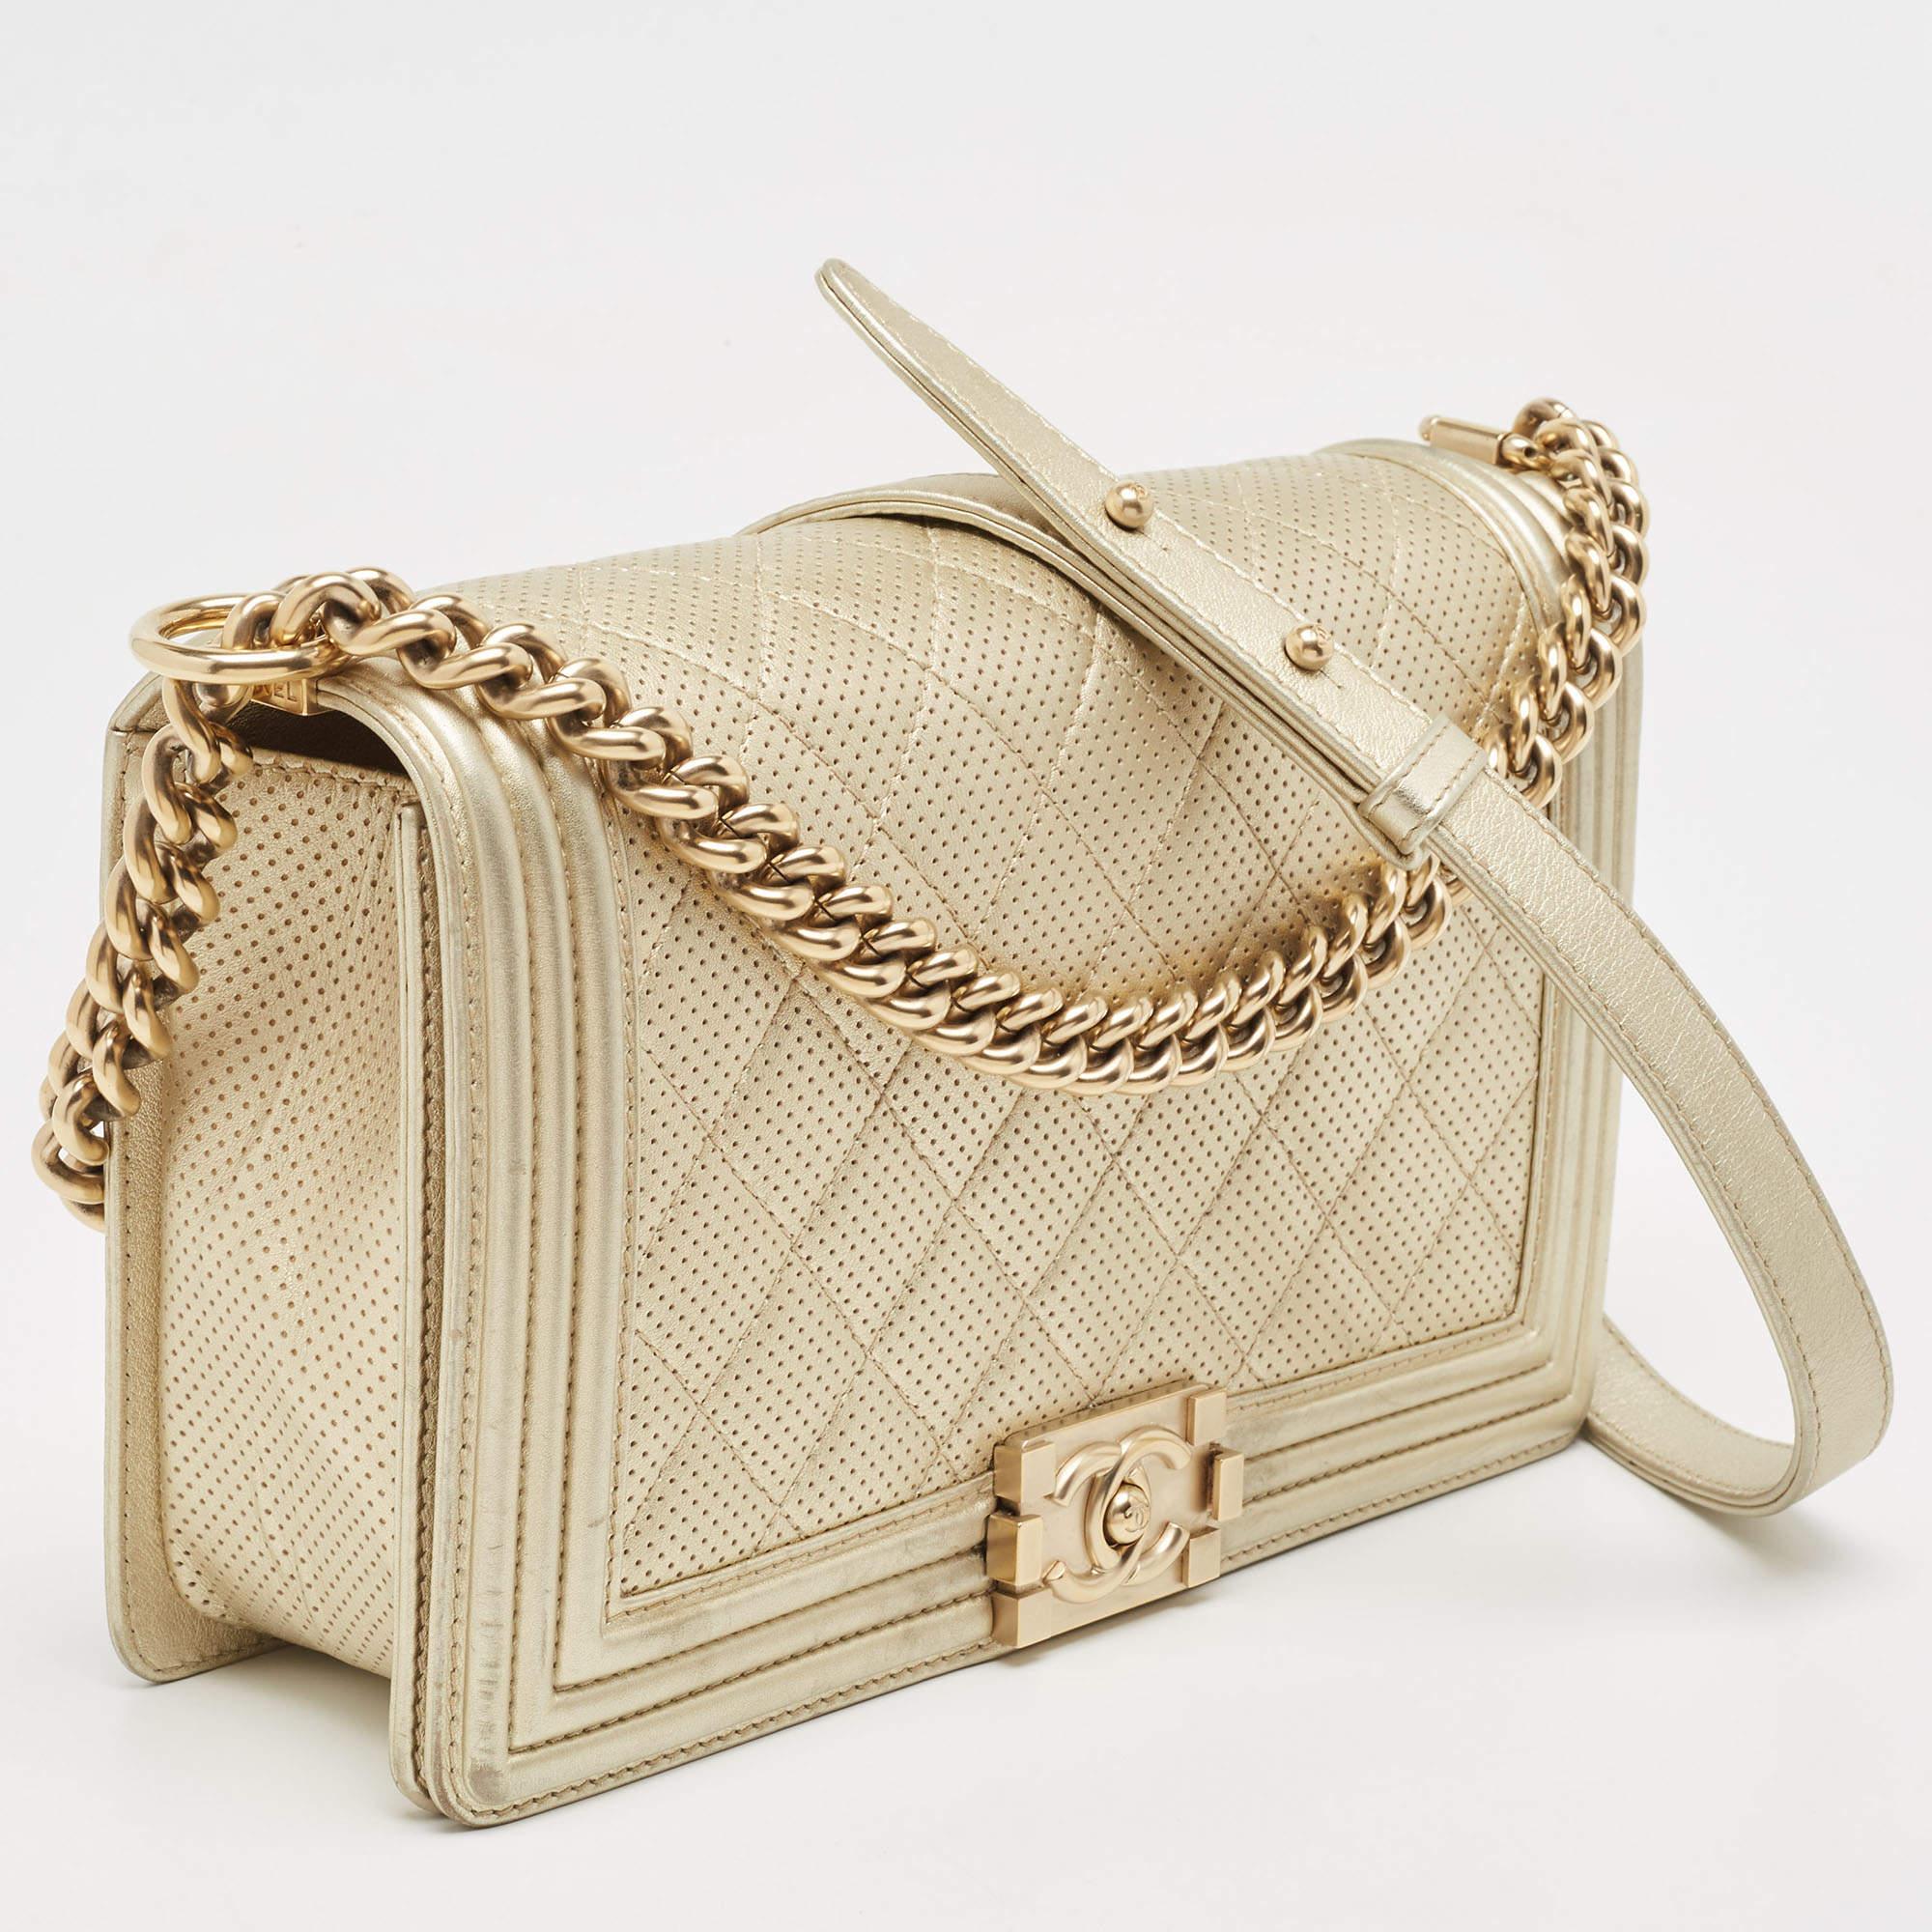 Women's Chanel Light Gold Perforated Leather New Medium Boy Flap Bag